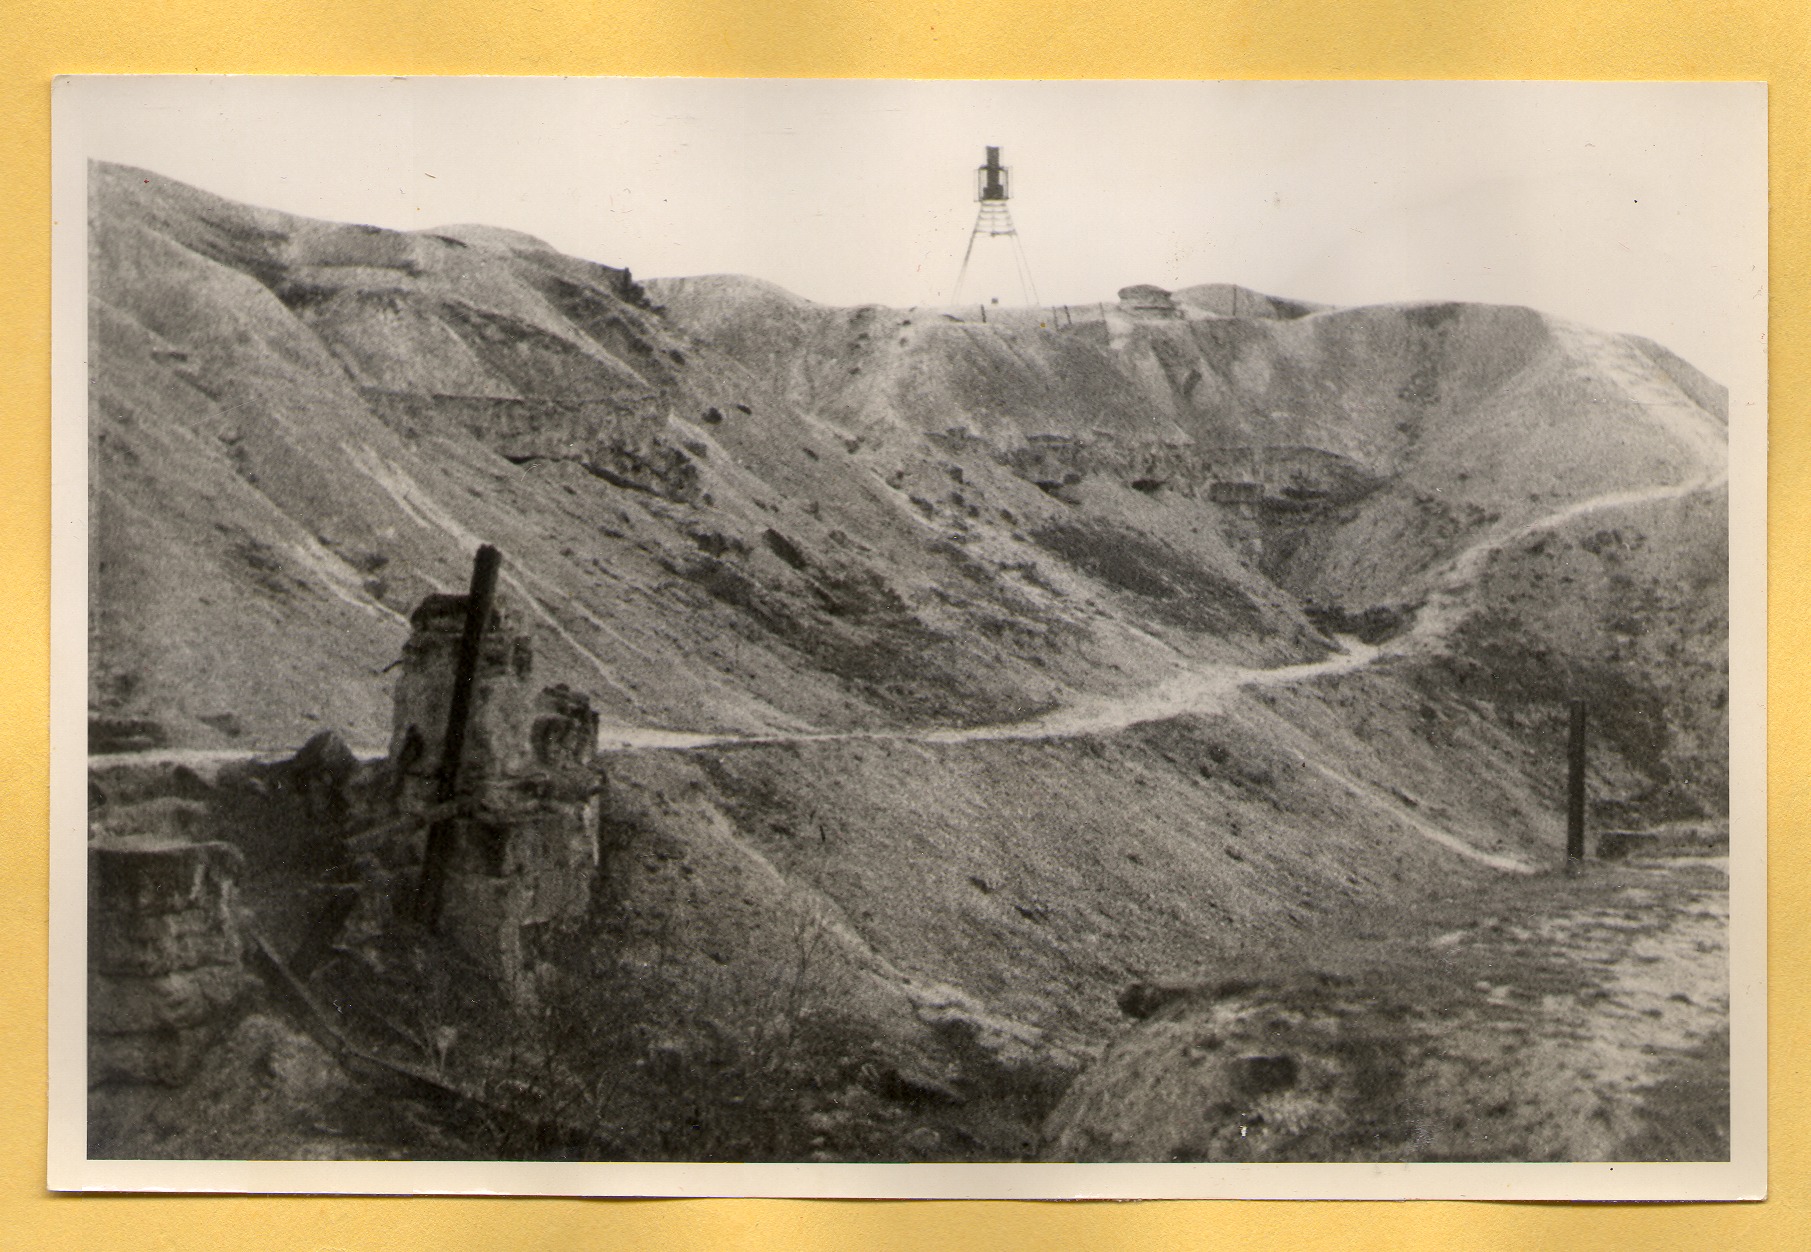 Building remains and road through the hills. Germany after WWI: photographic print